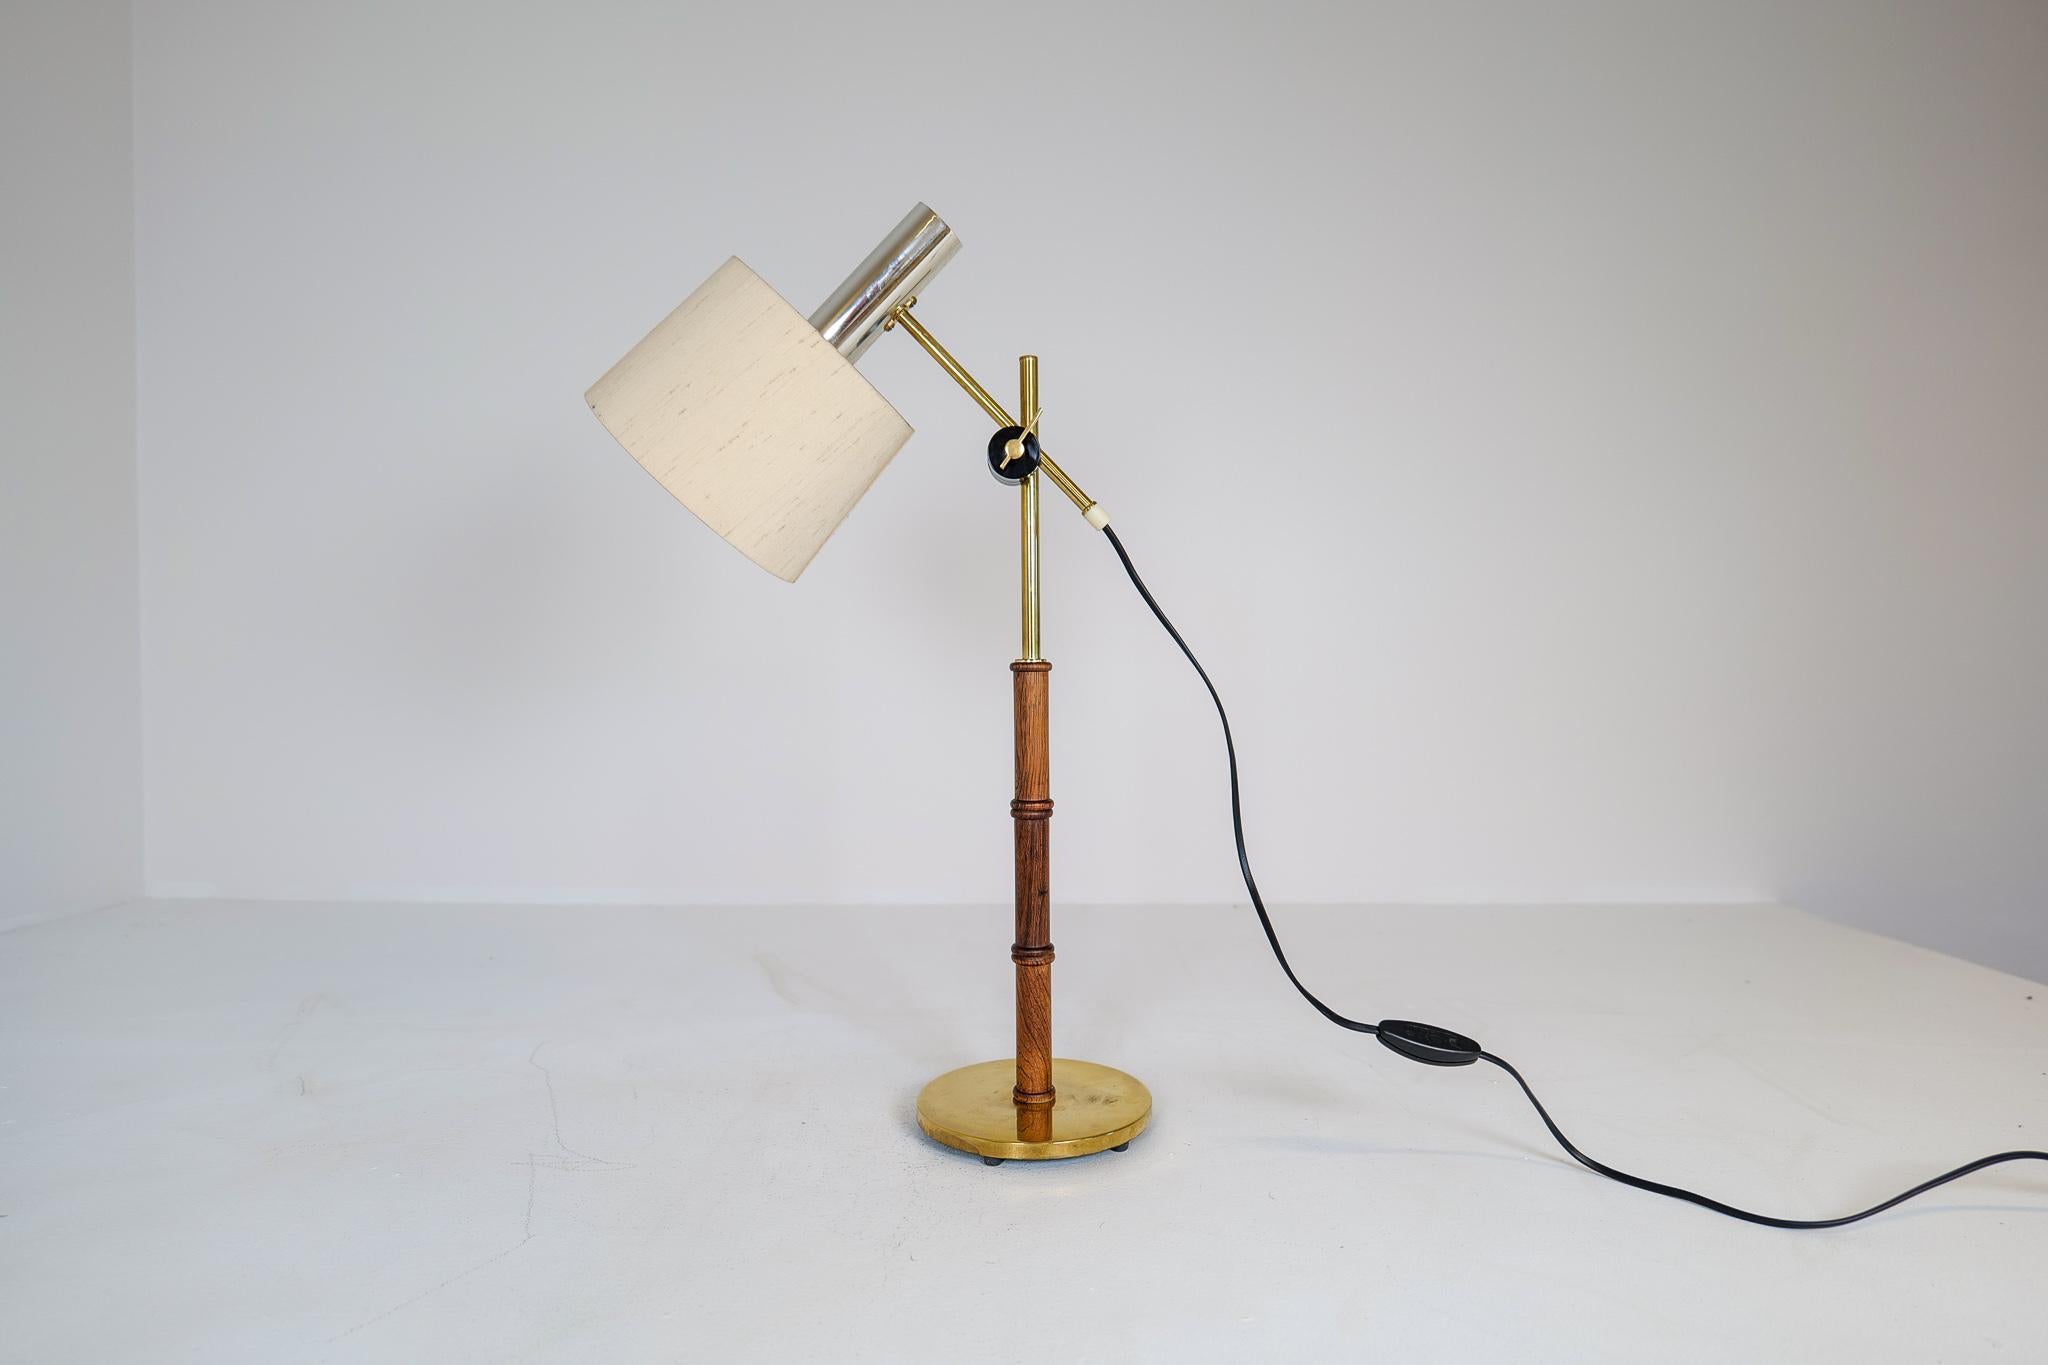 This lamp was made in Sweden at Falkenbergs Belysning. It has an adjustable height and angle arm, and is made in brass, wooden steam, and cast-iron base.

Good working condition with some dents on the foot and scratches on the